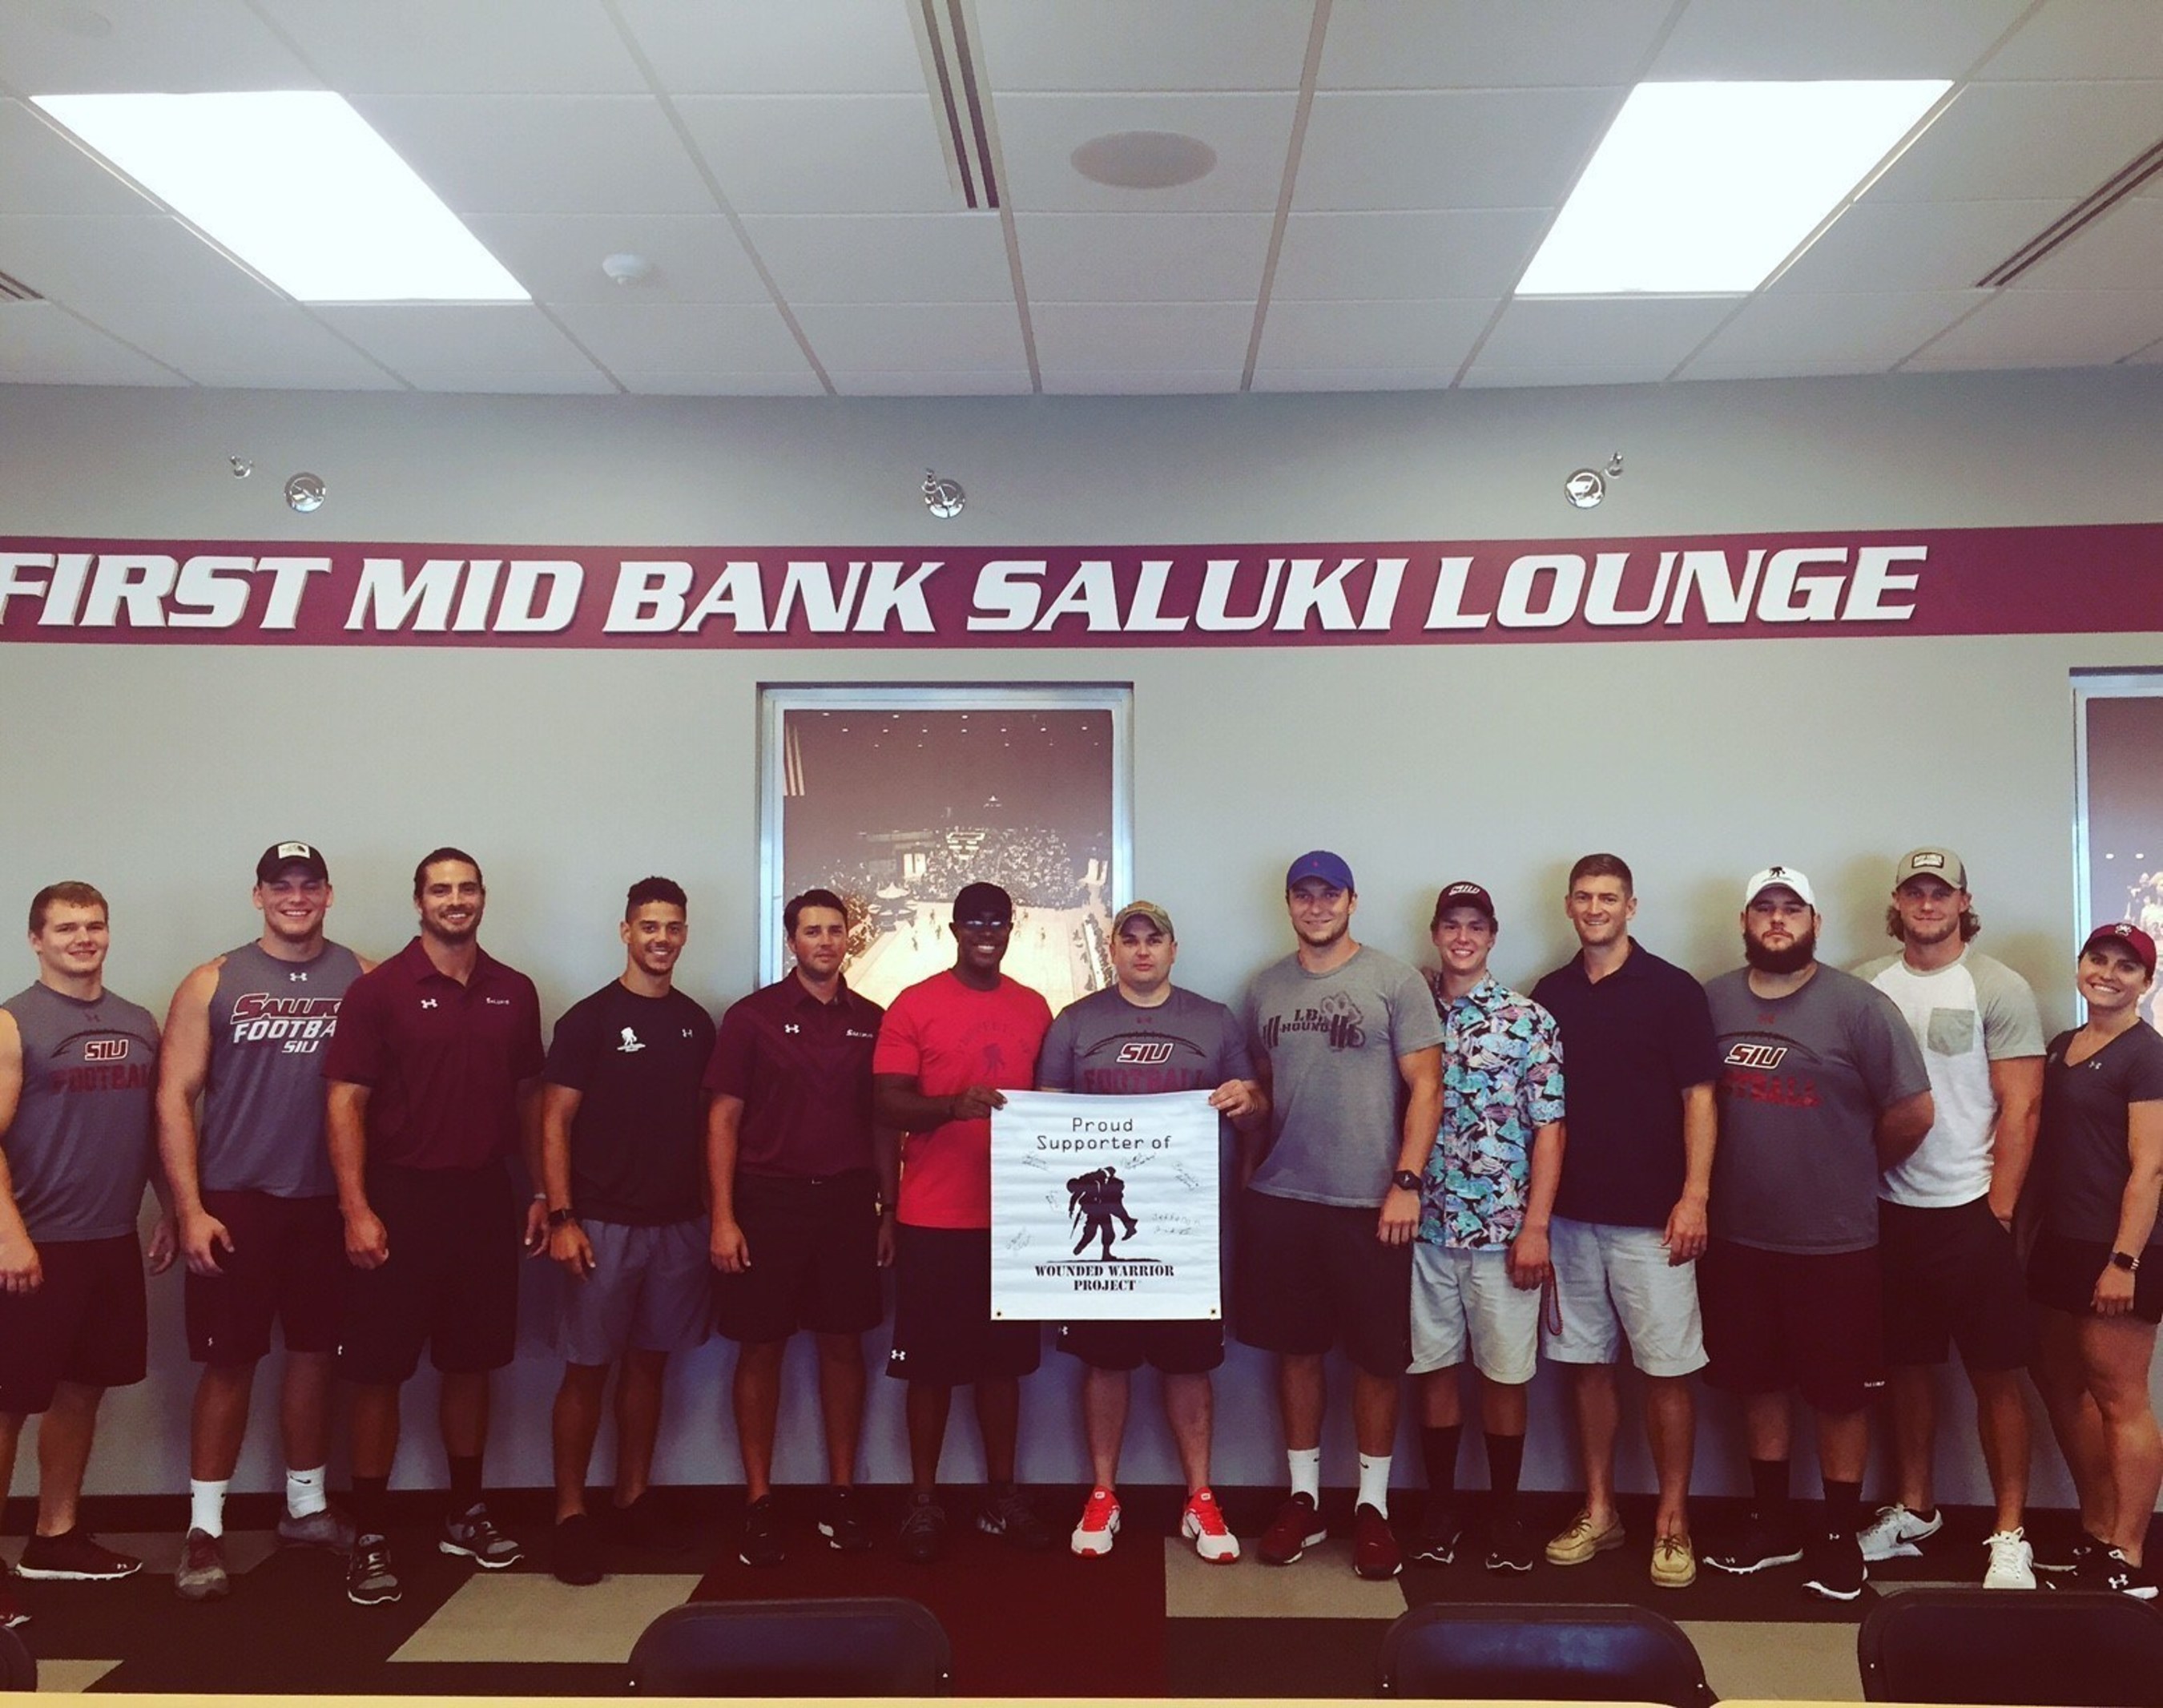 Warriors pose with Southern Illinois University staff, during a workout event sponsored by Wounded Warrior Project.